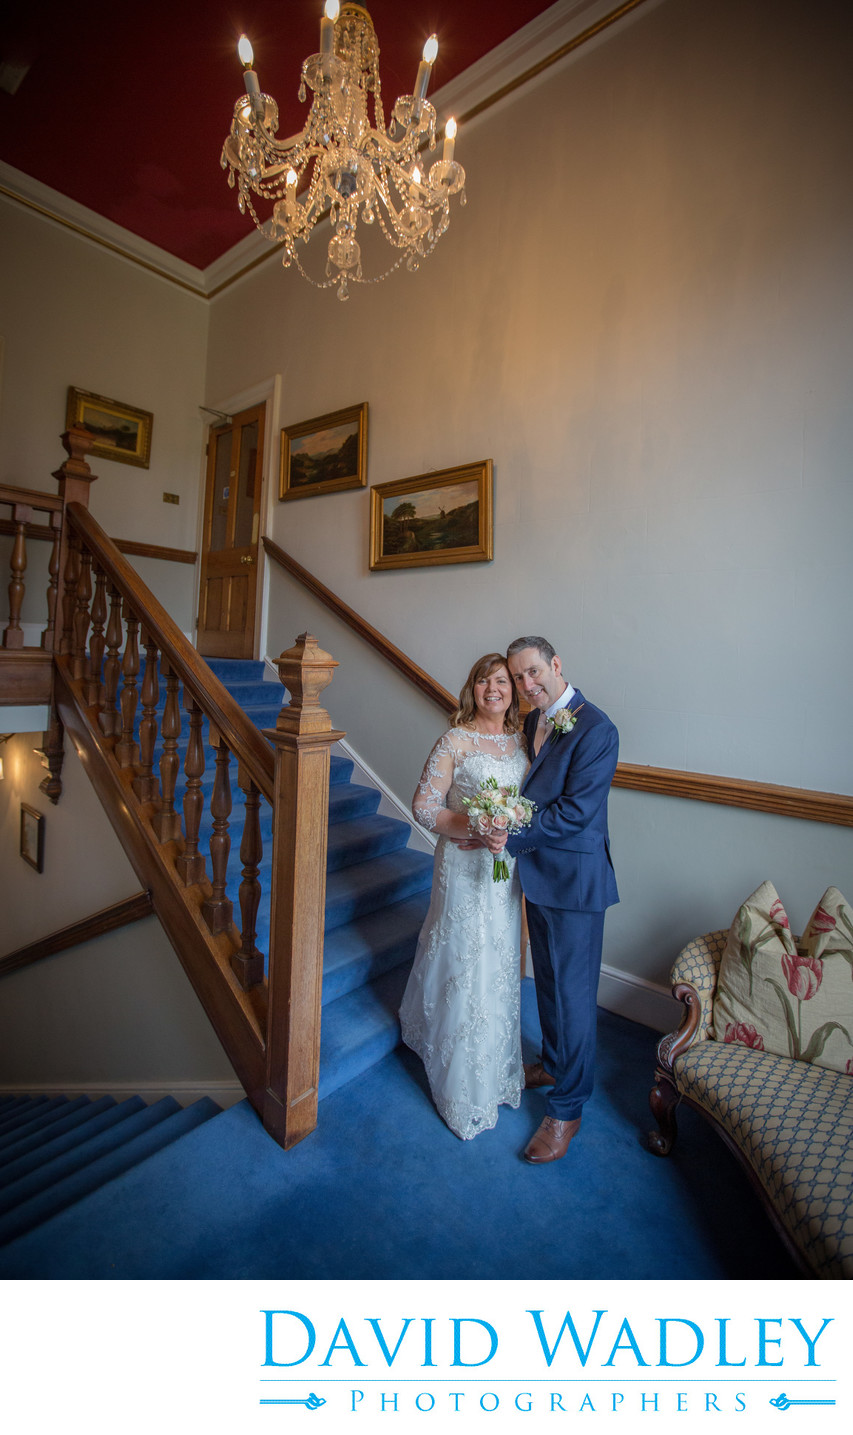 Bride & Groom on their wedding day on stairs at Grafton Manor.